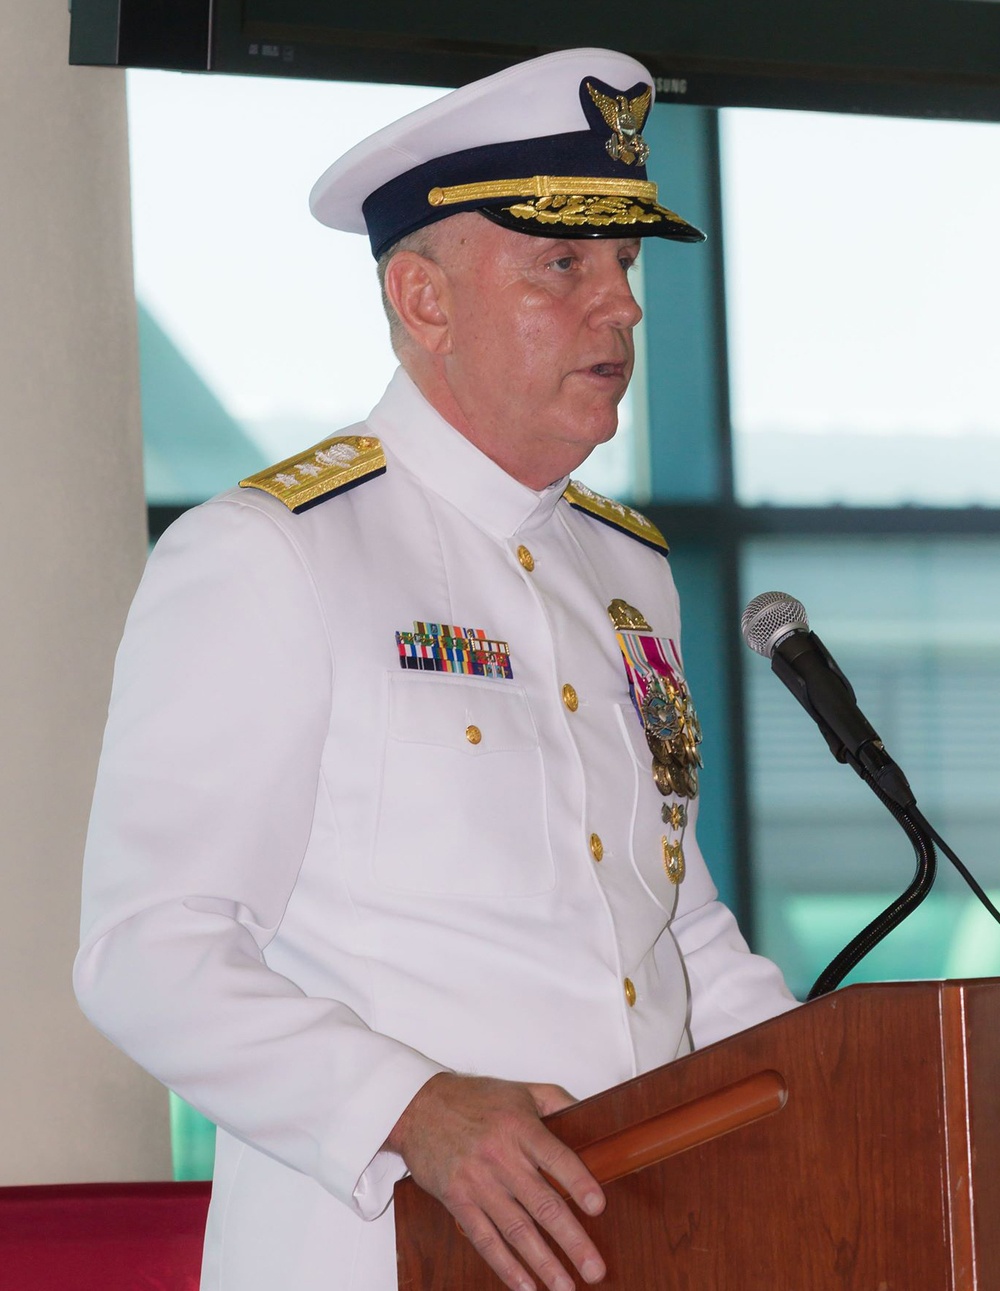 Rear Adm. Smith takes command of 5th District